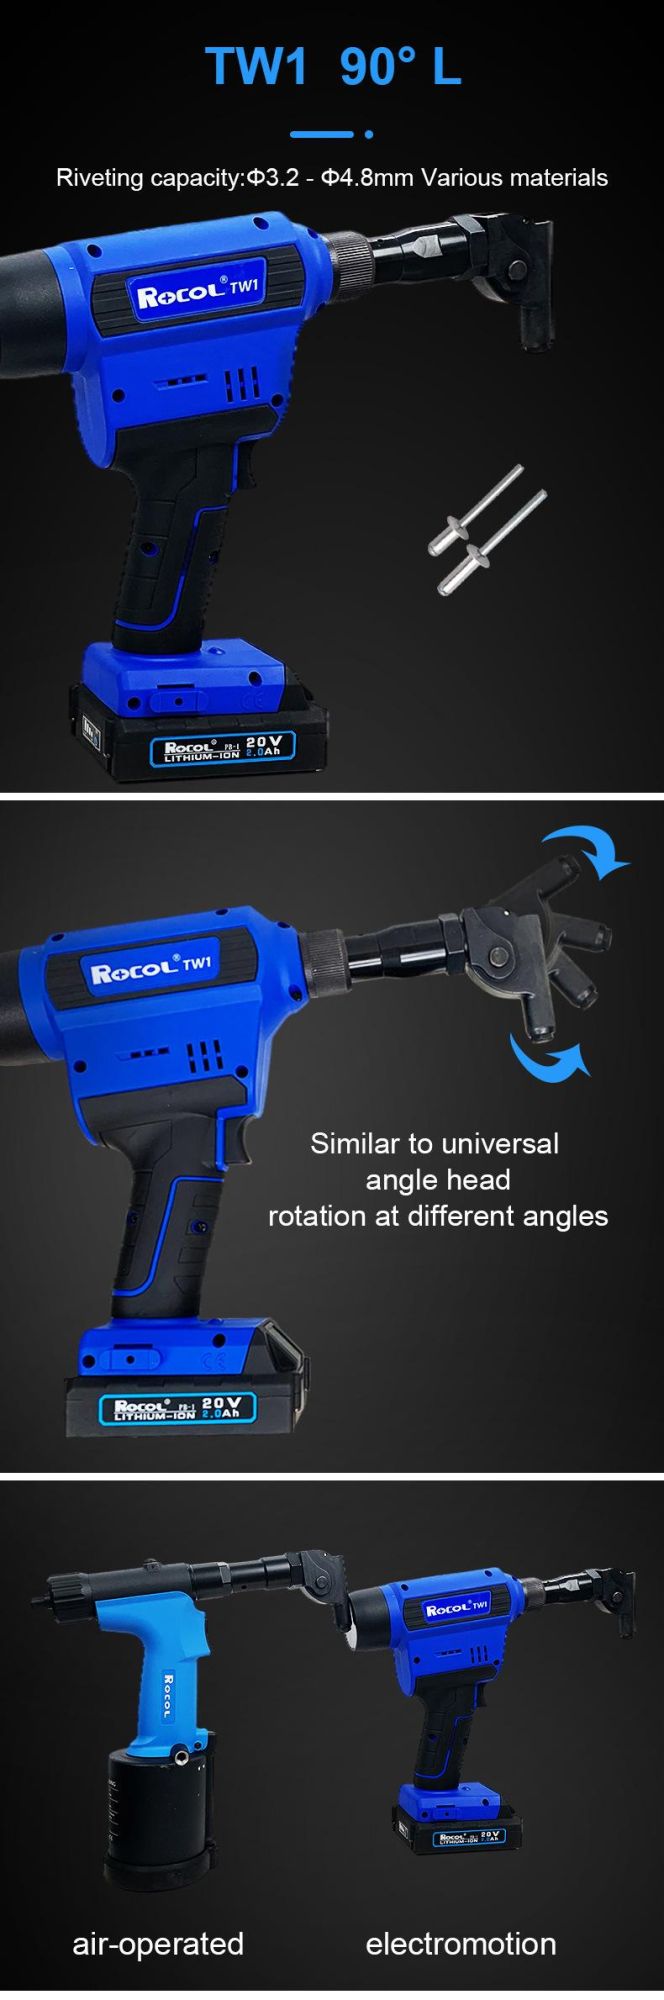 Work Capacity 2.4-4.0mm Easy Replacement of Claw Pieces Rivet Gun